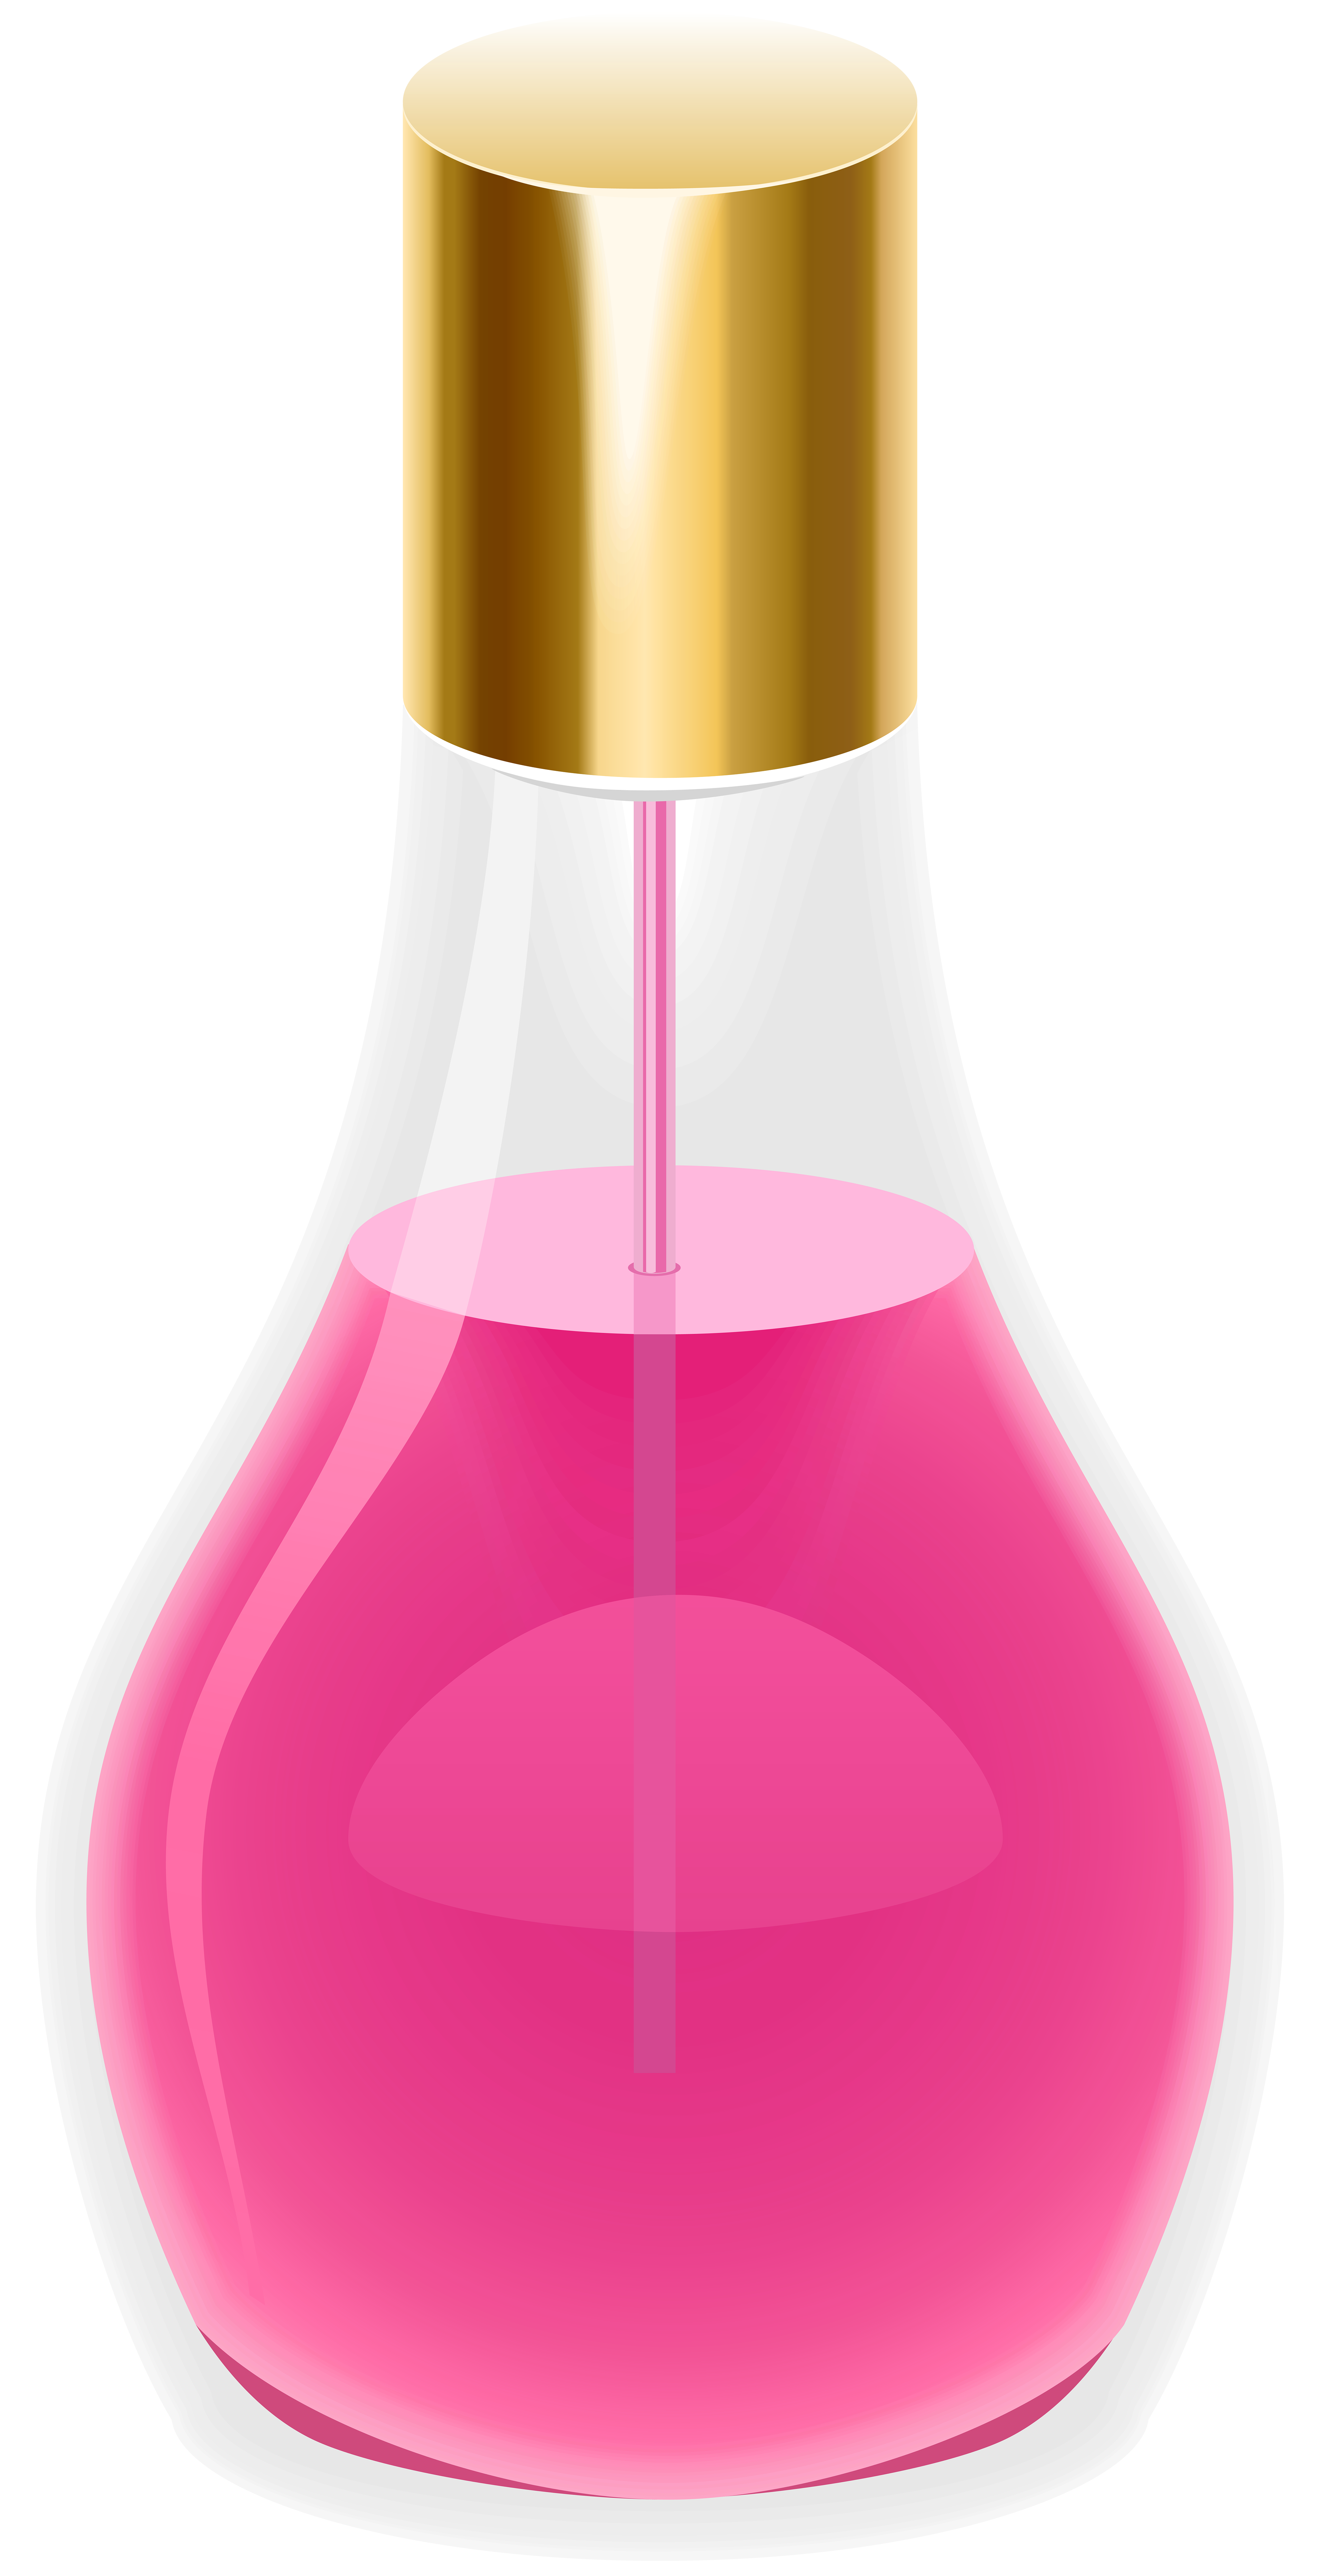 Perfume bottle png. Clip art image gallery